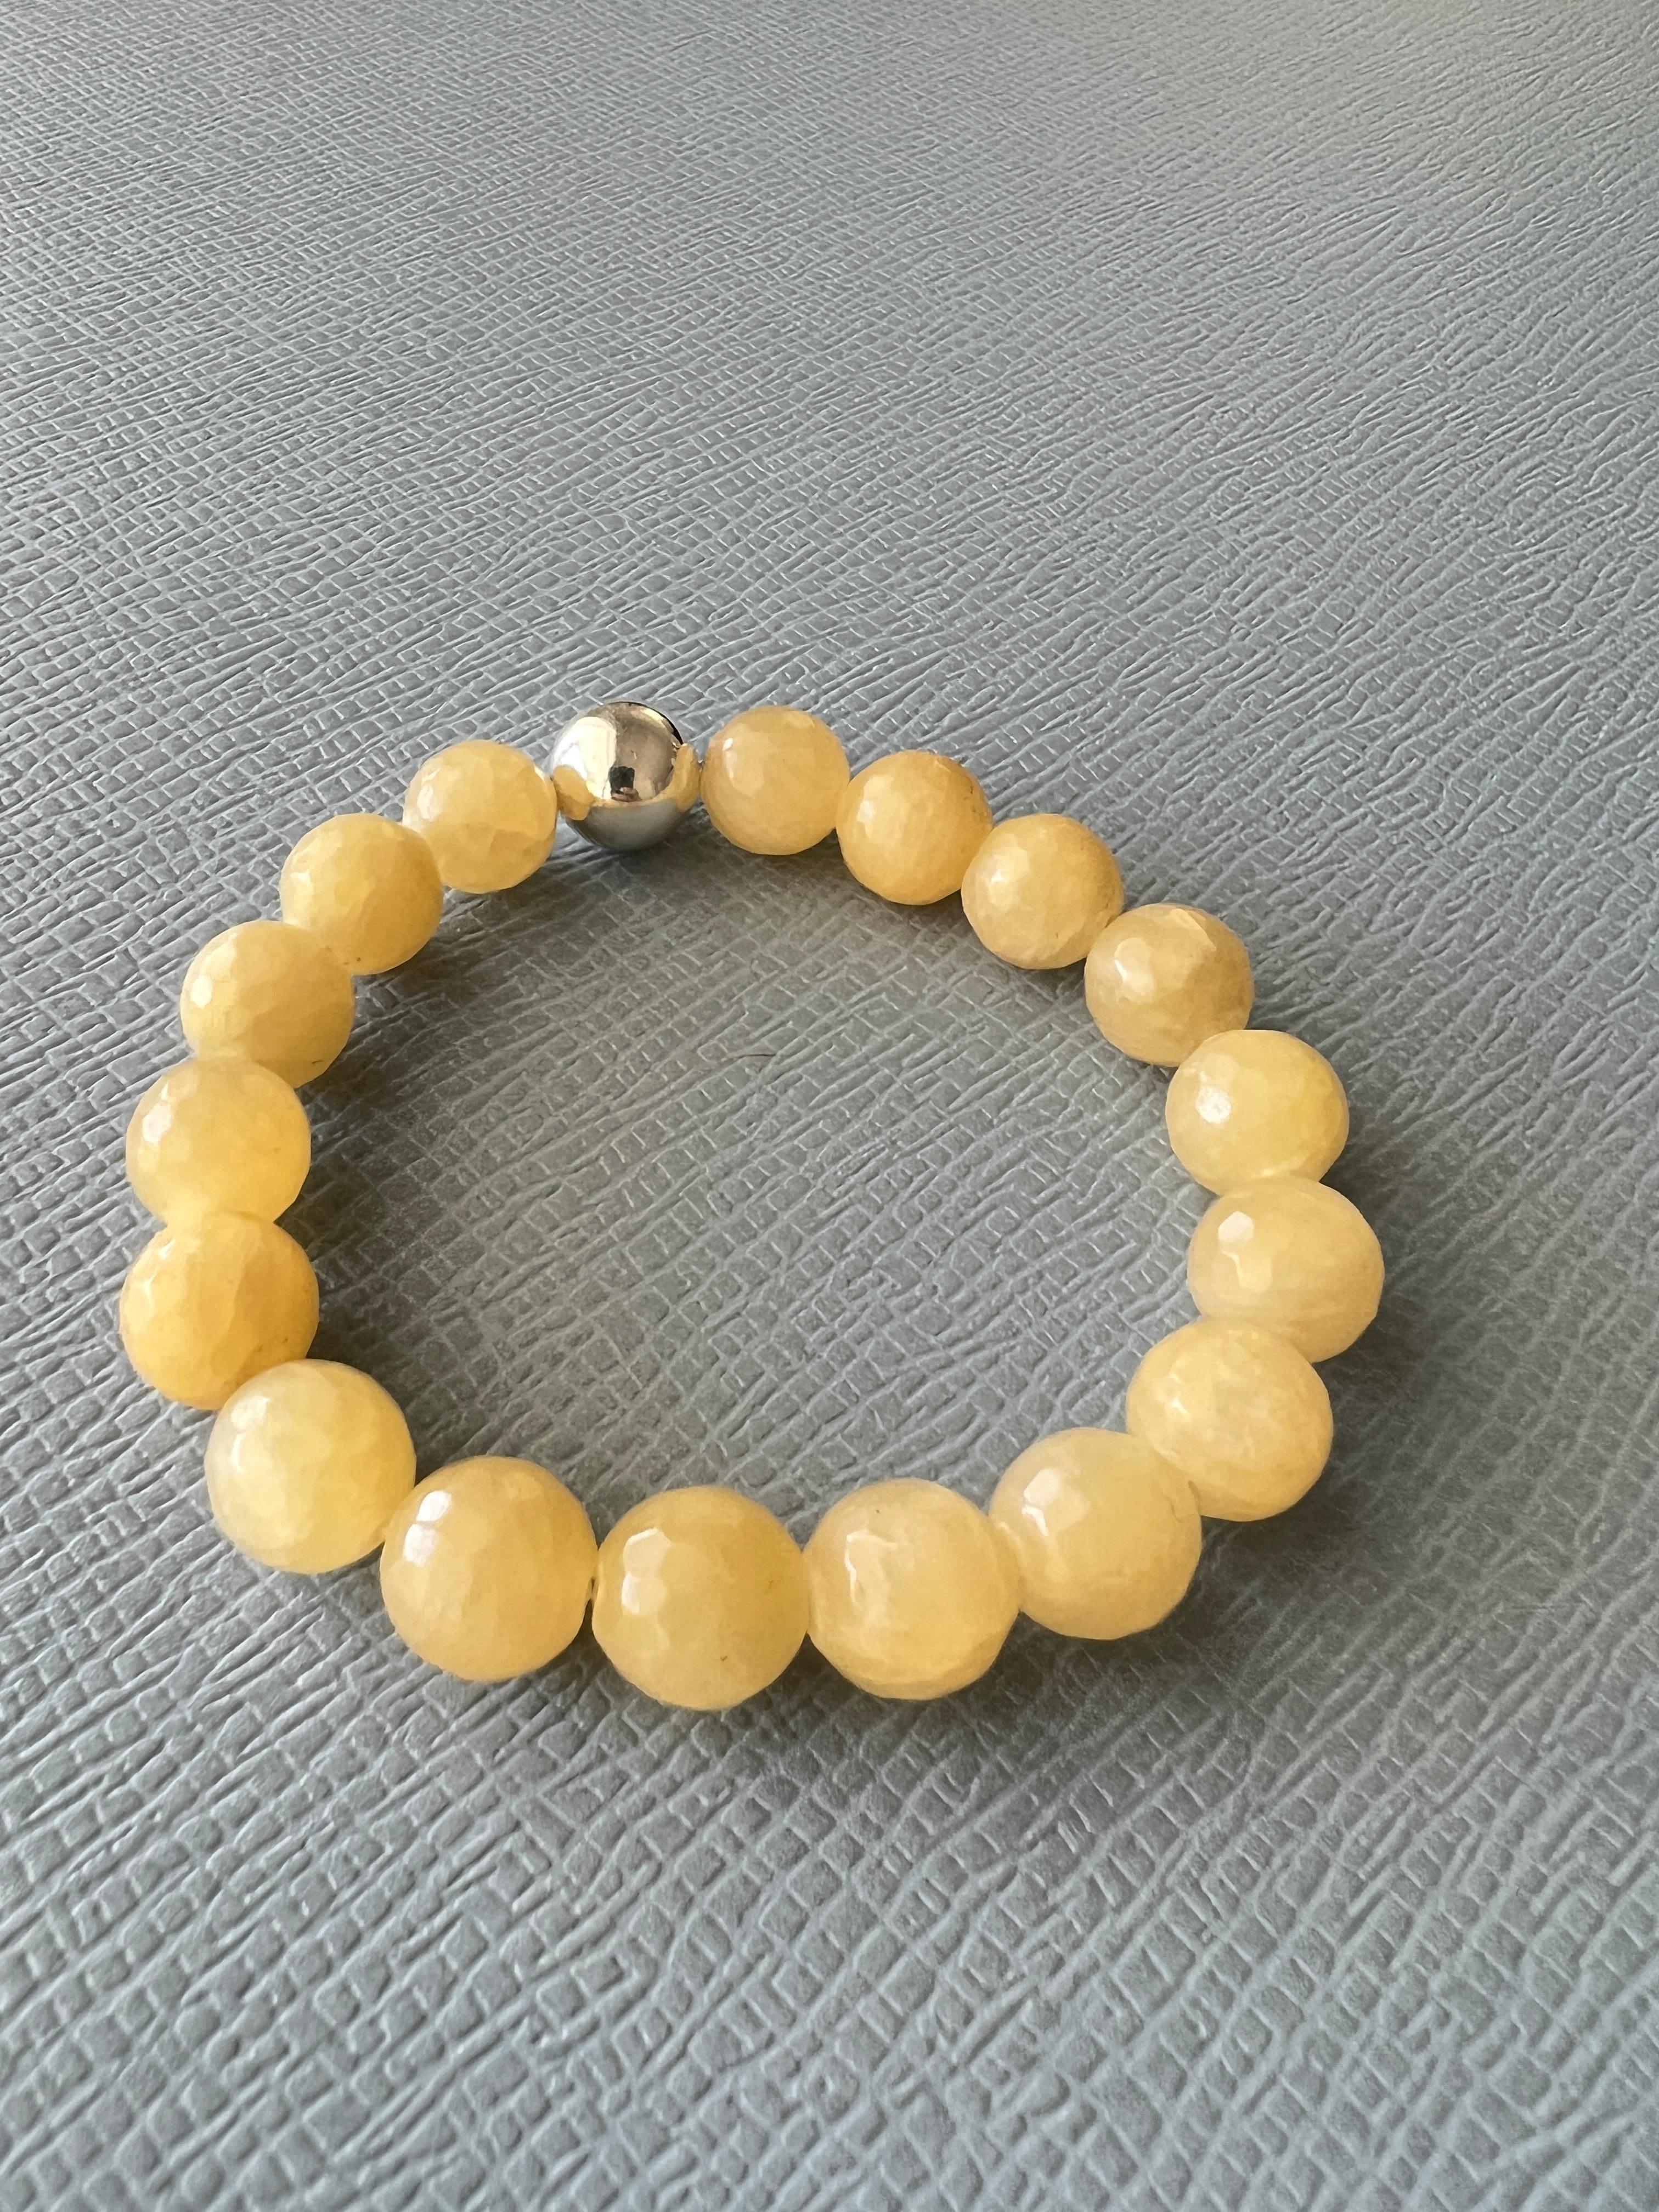 Women's or Men's Yellow Calcite Round Facteted Bead Bracelet Silver J Dauphin For Sale